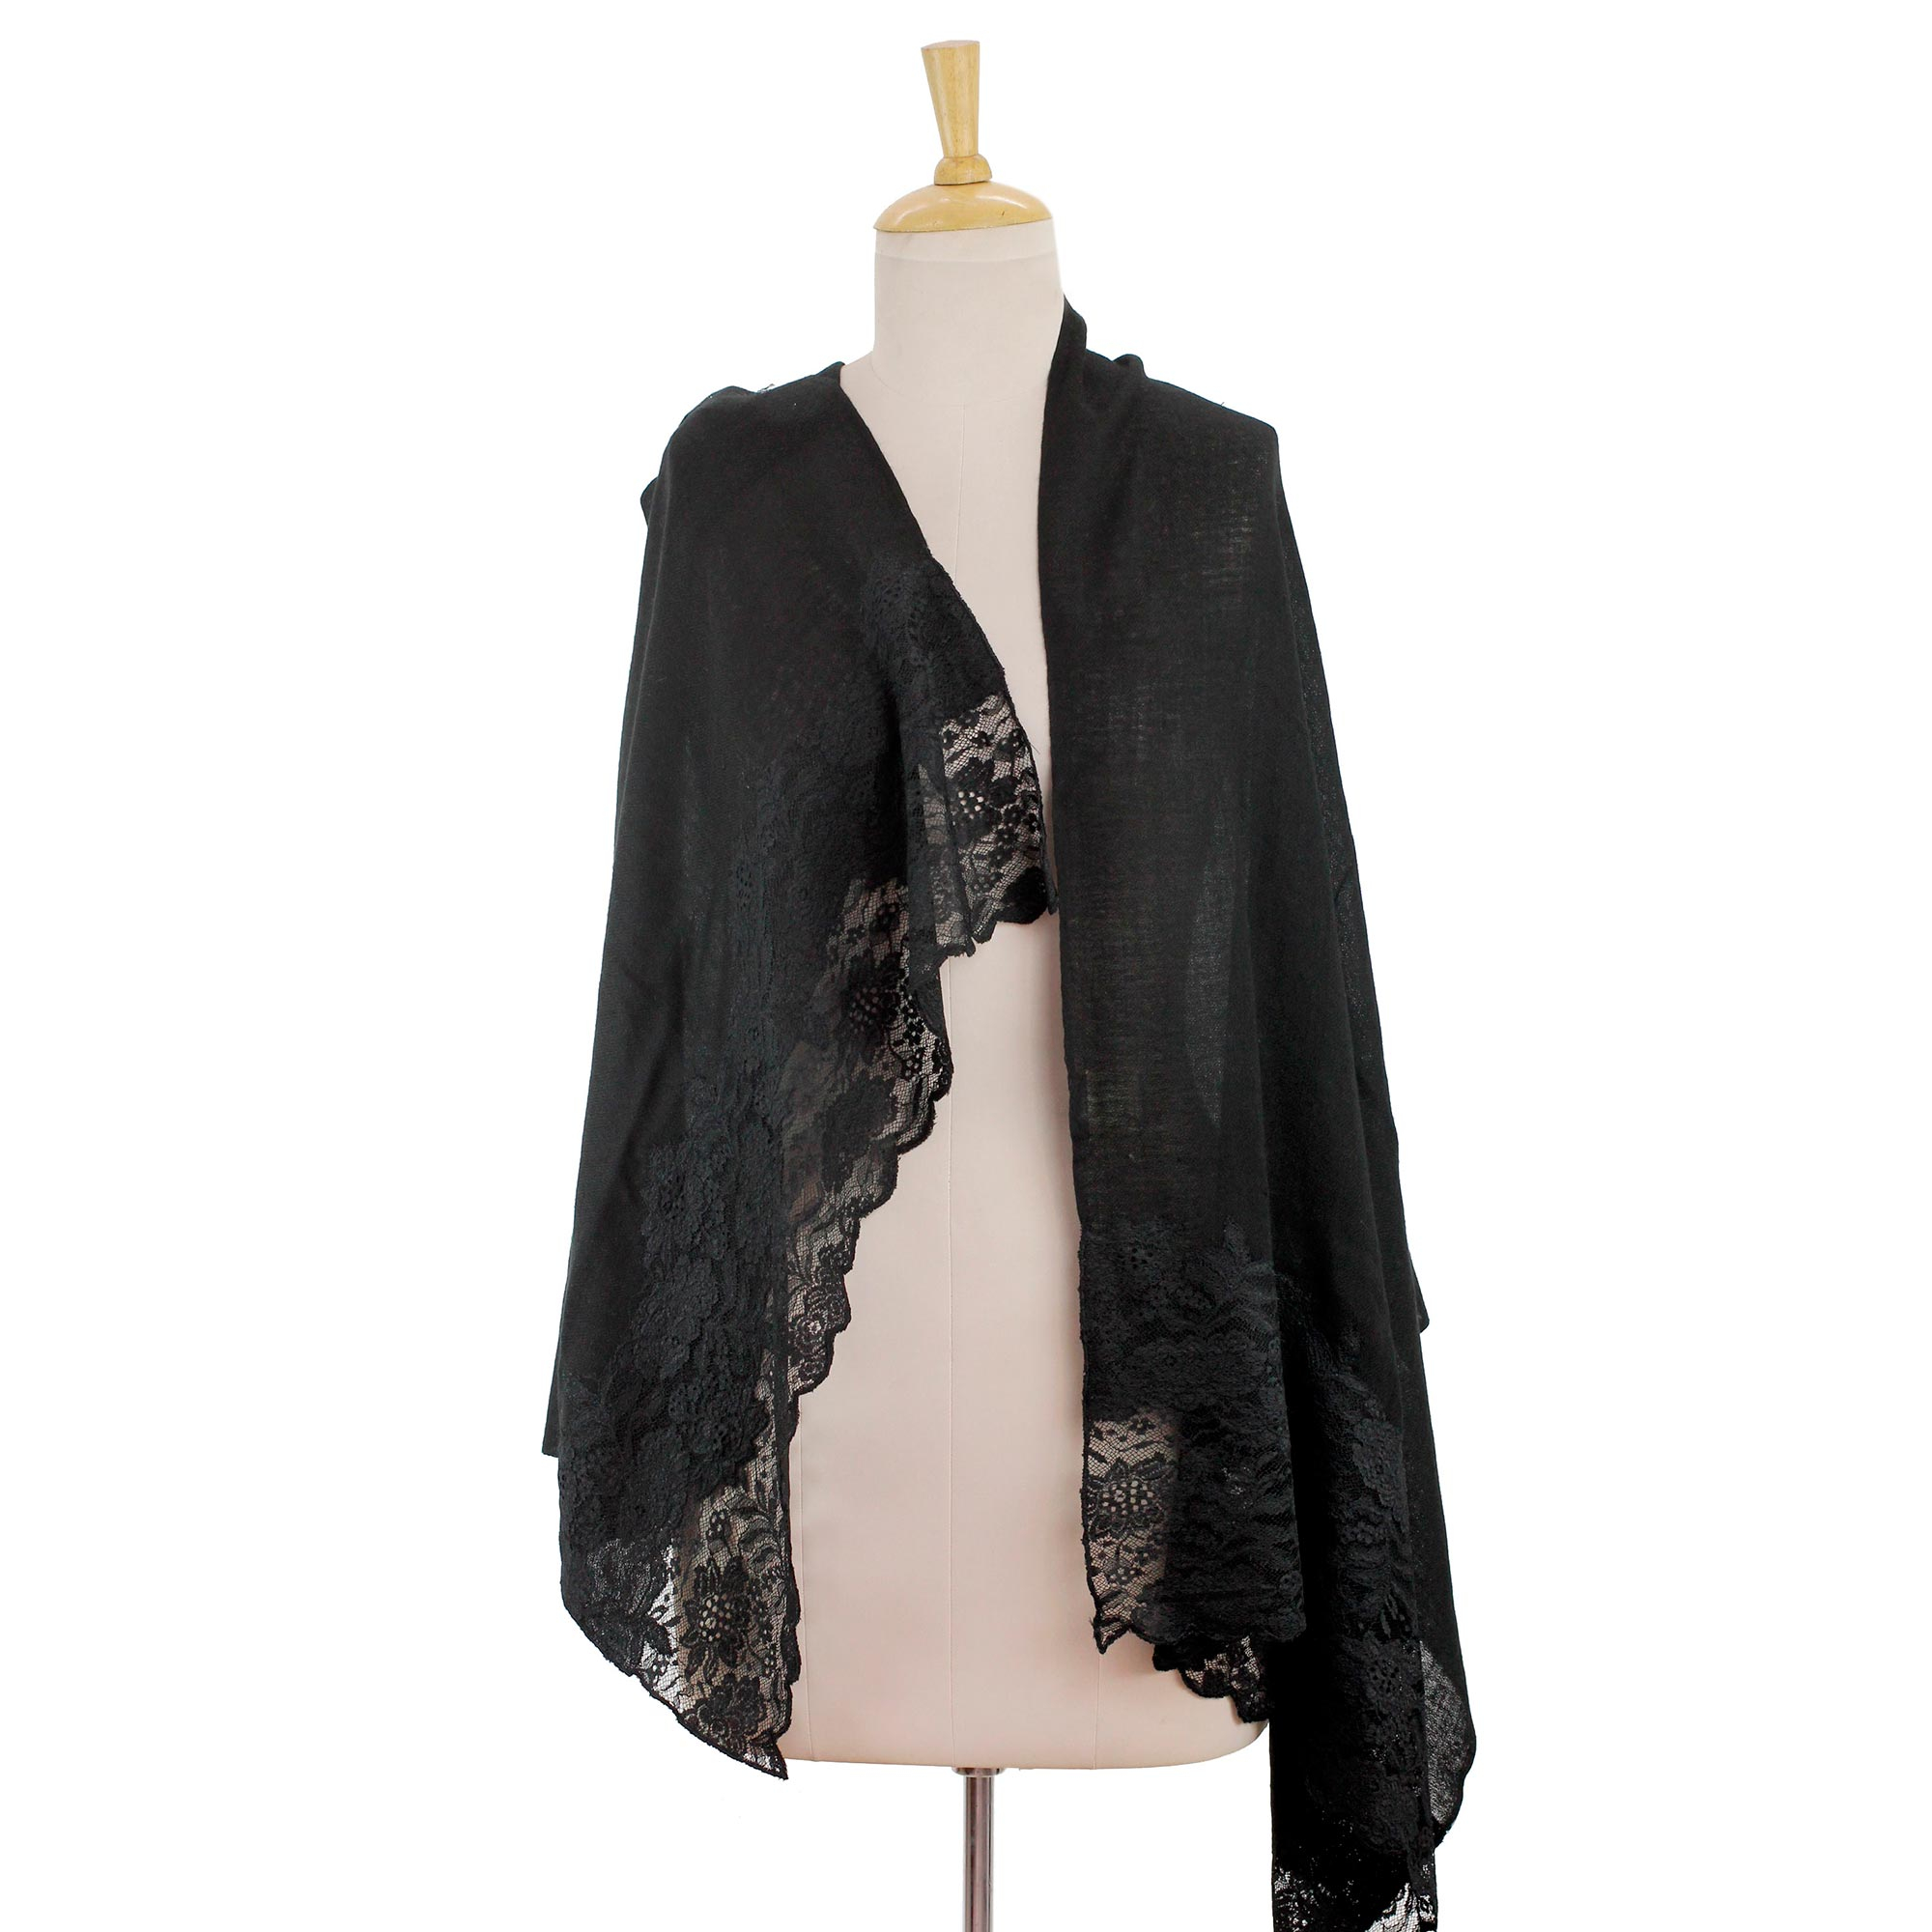 Floral Lace on Black Wool Blend Shawl Wrap from India - Impassioned ...